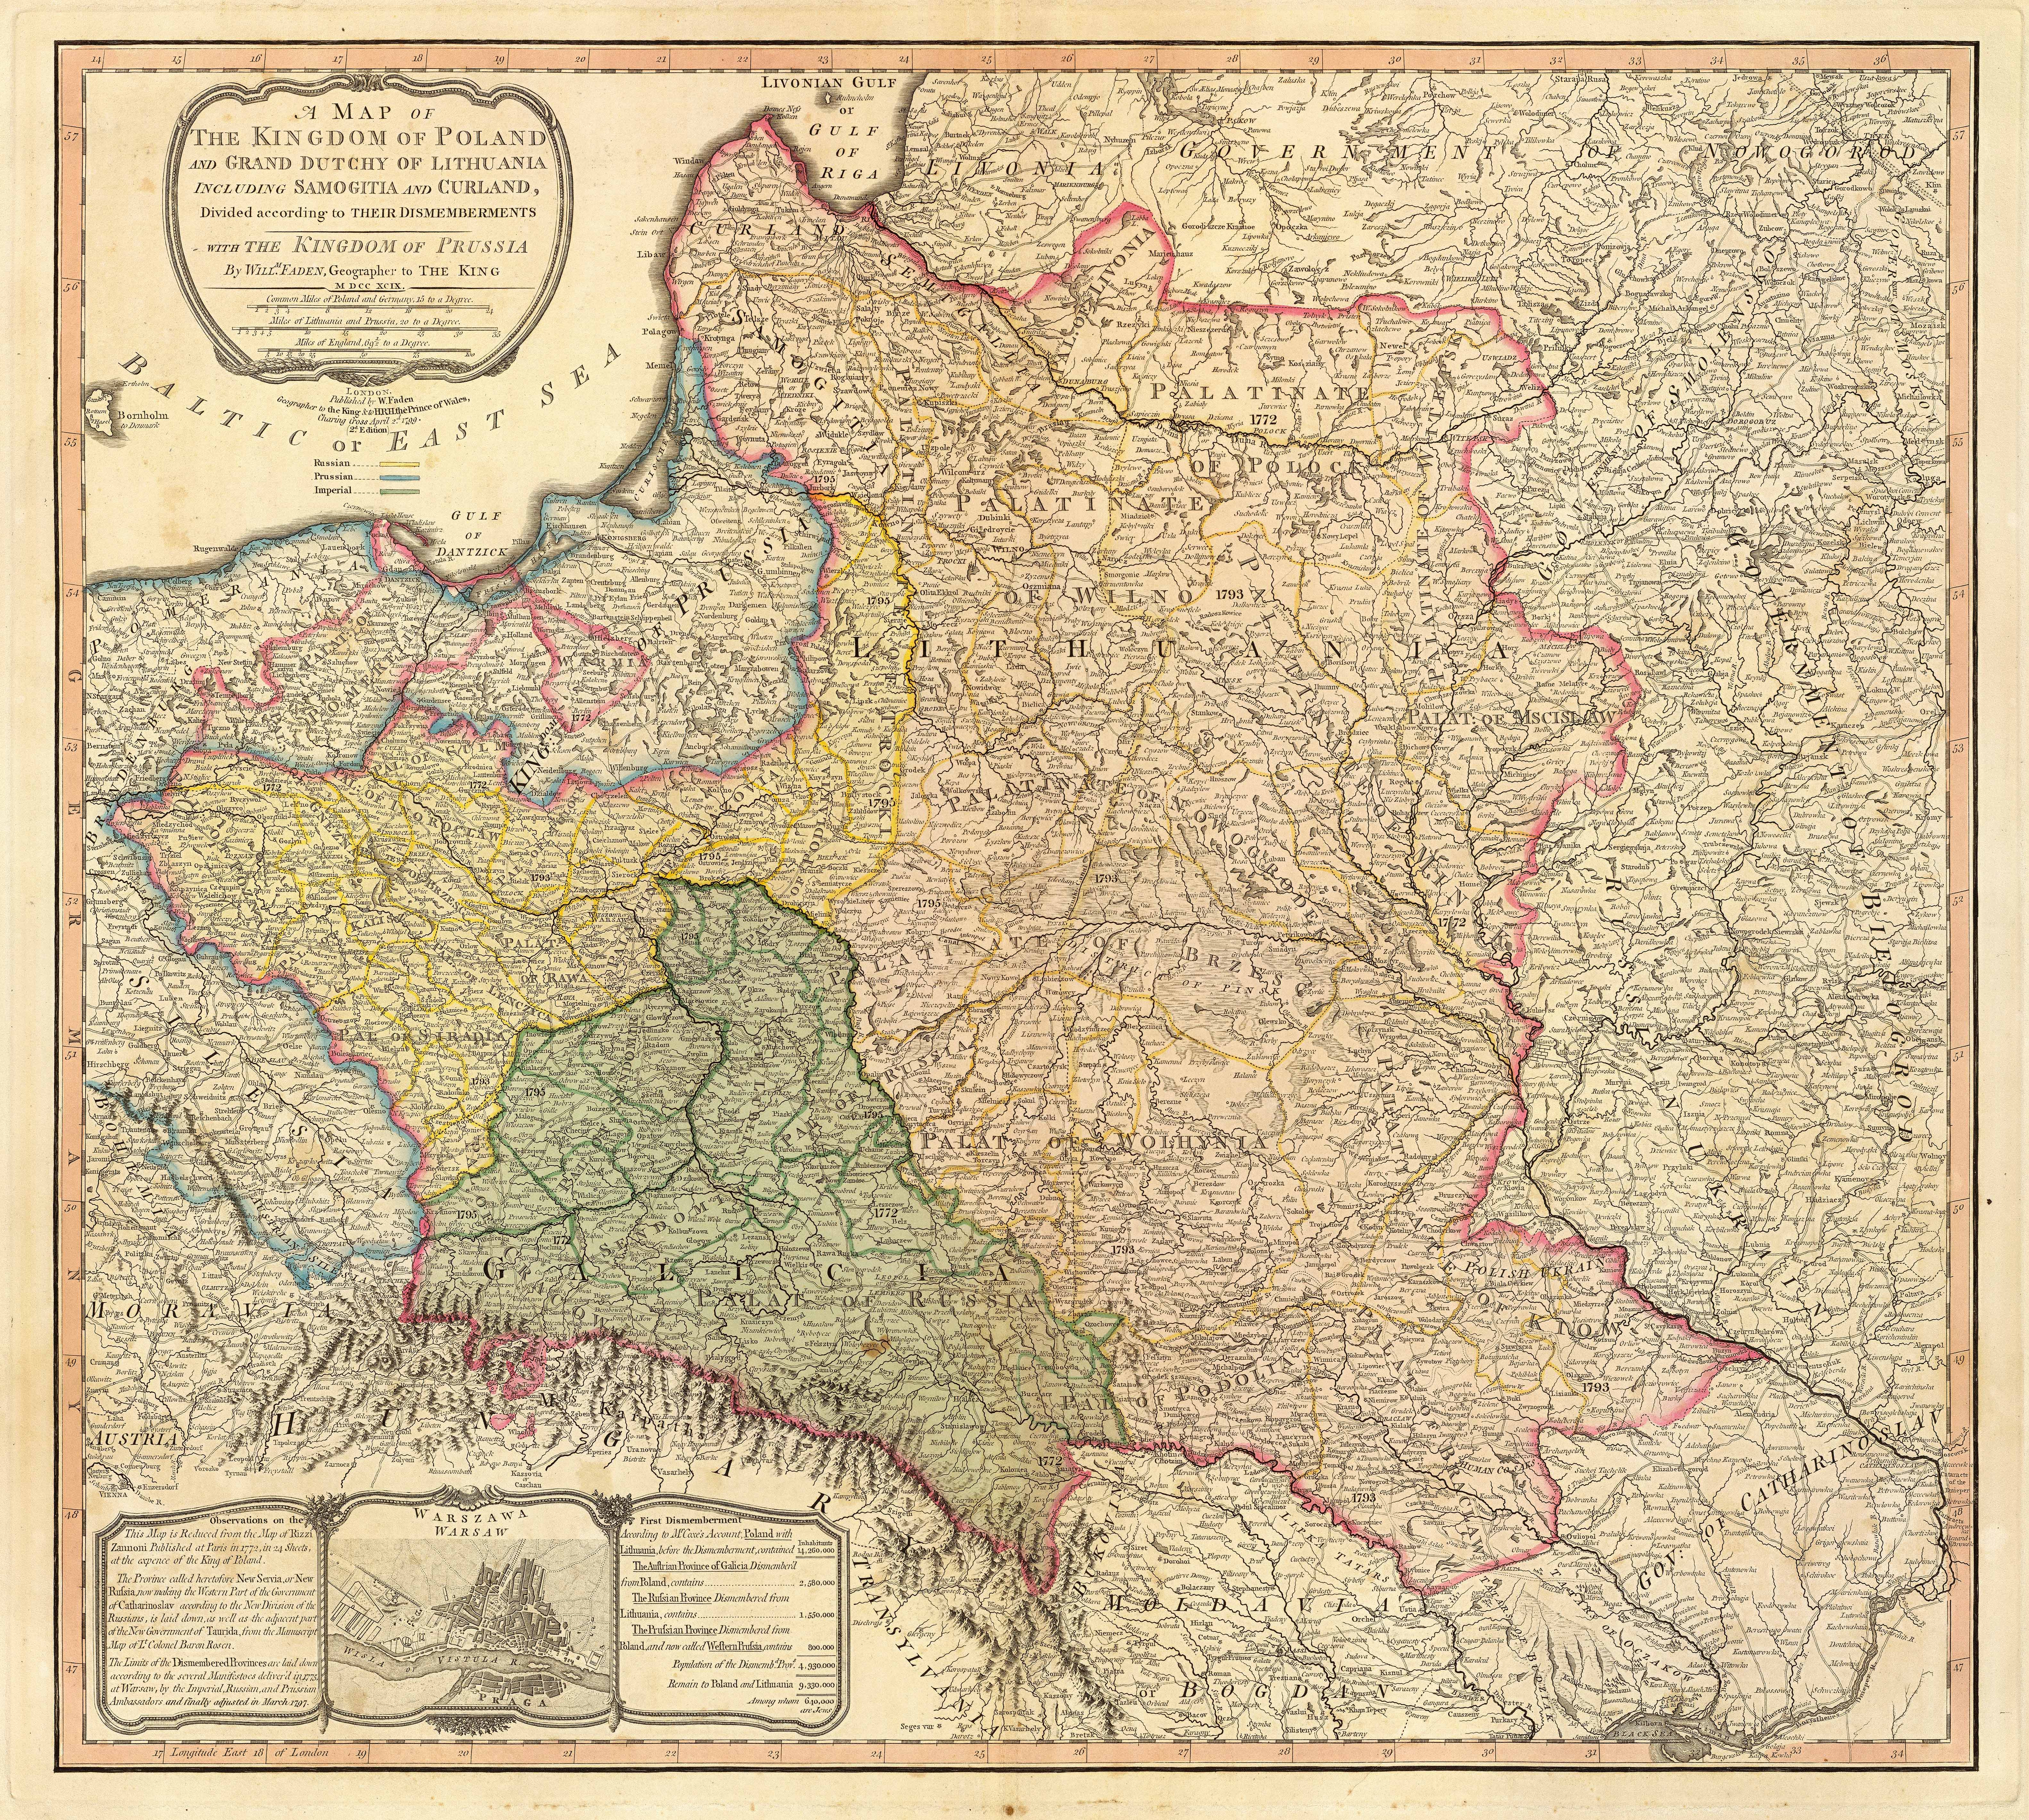 Stare mapy - Old ... - A Map of the Kingdom of Poland   Divided according to Their Dismemberments   - Faden 1799.jpg